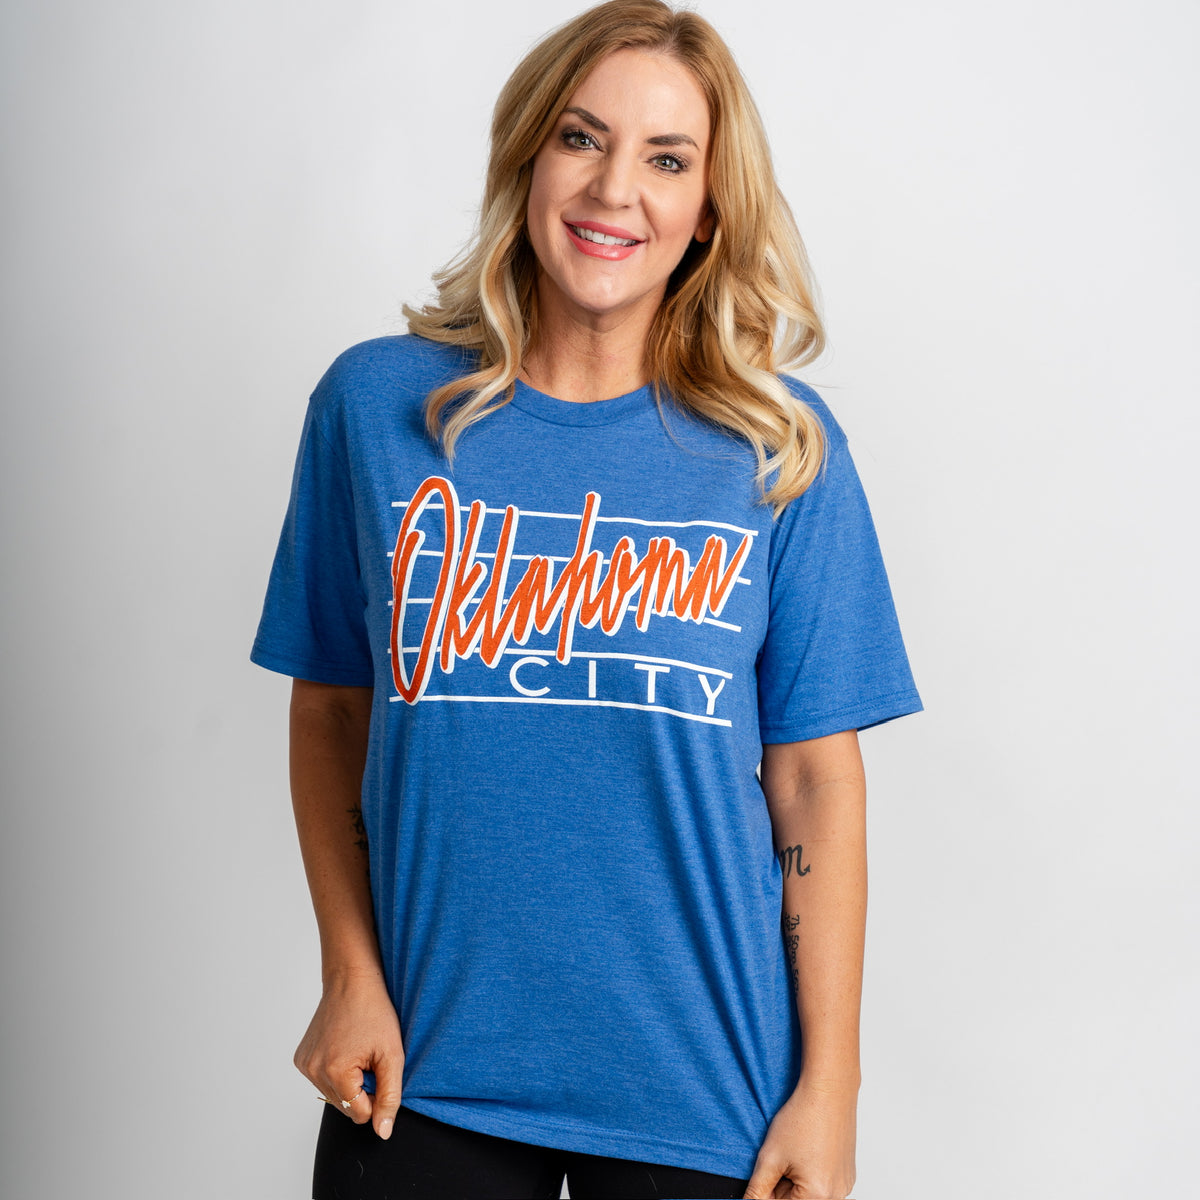 OKC diagonal lines unisex t-shirt royal blue - Oklahoma City inspired graphic t-shirts at Lush Fashion Lounge Boutique in Oklahoma City